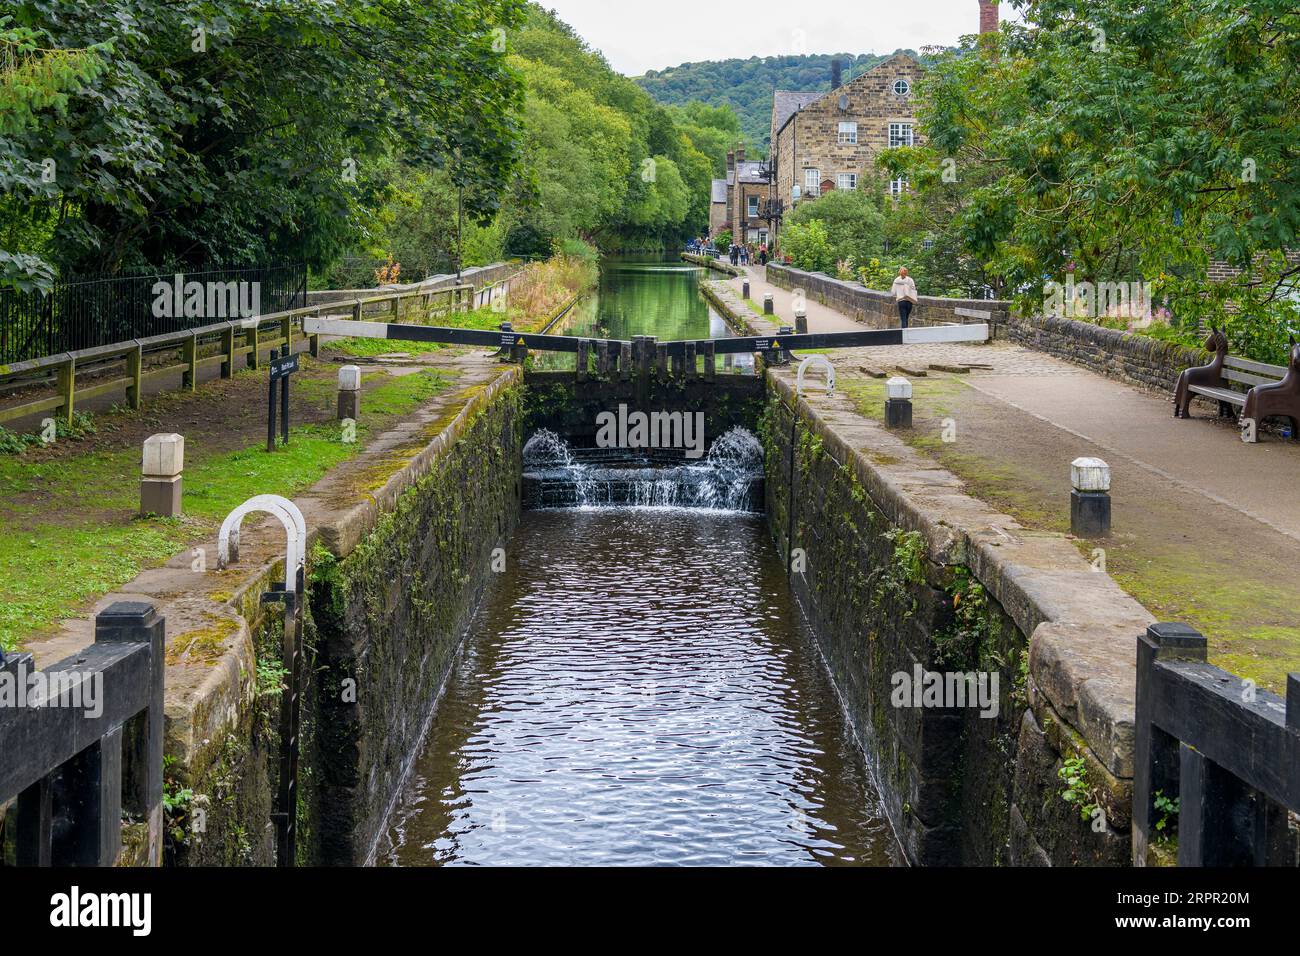 Hebden Bridge lock gates on the Rochdale Canal. River Calder combines with Rochdale Canal here. Barges and small boats use this stretch of water. Stock Photo